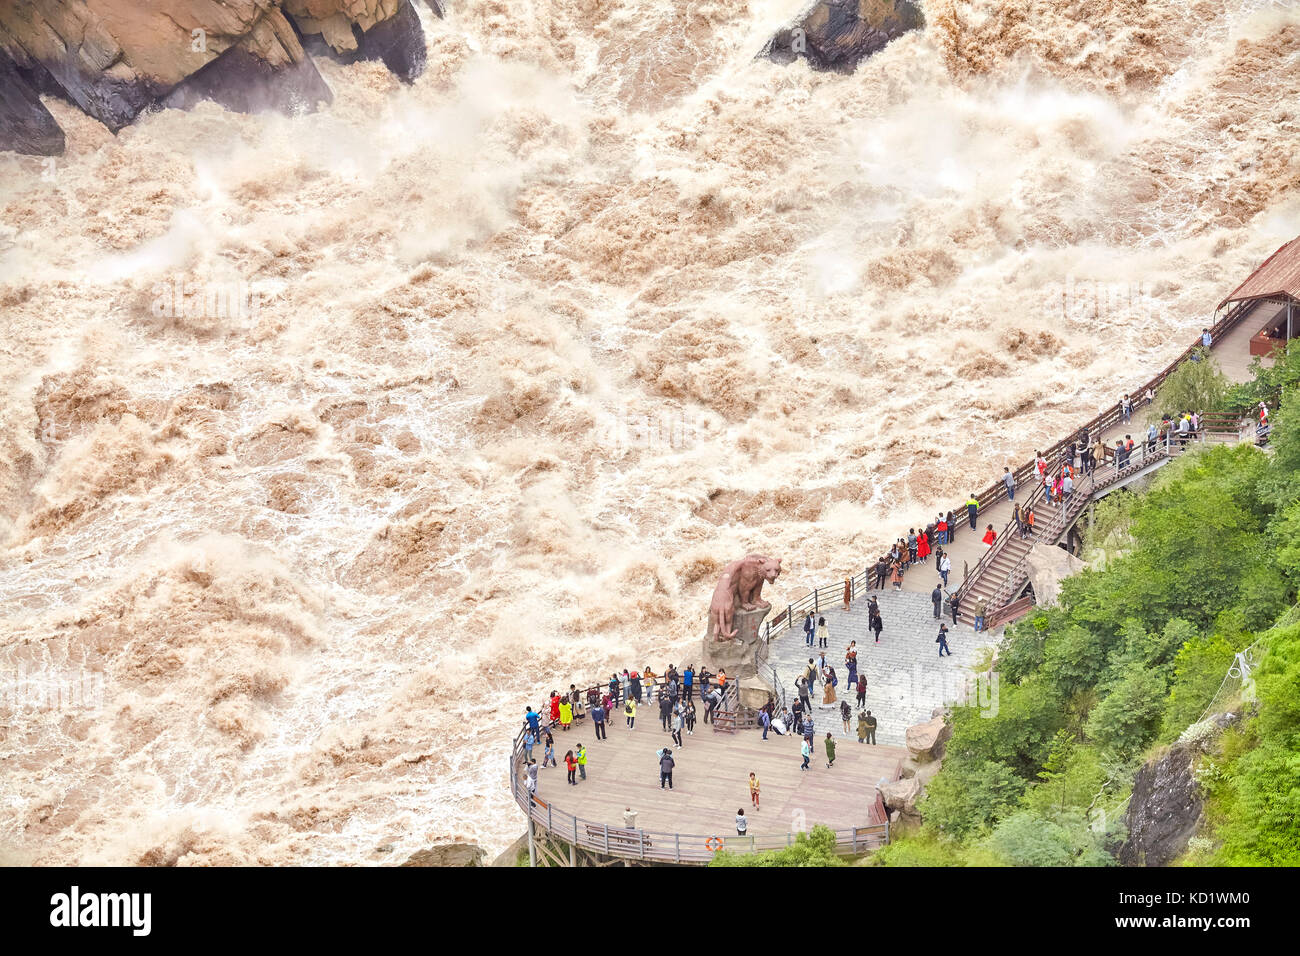 Tiger Leaping Gorge, one of the deepest and most spectacular river canyons in the world, located on the Jinsha River. Stock Photo